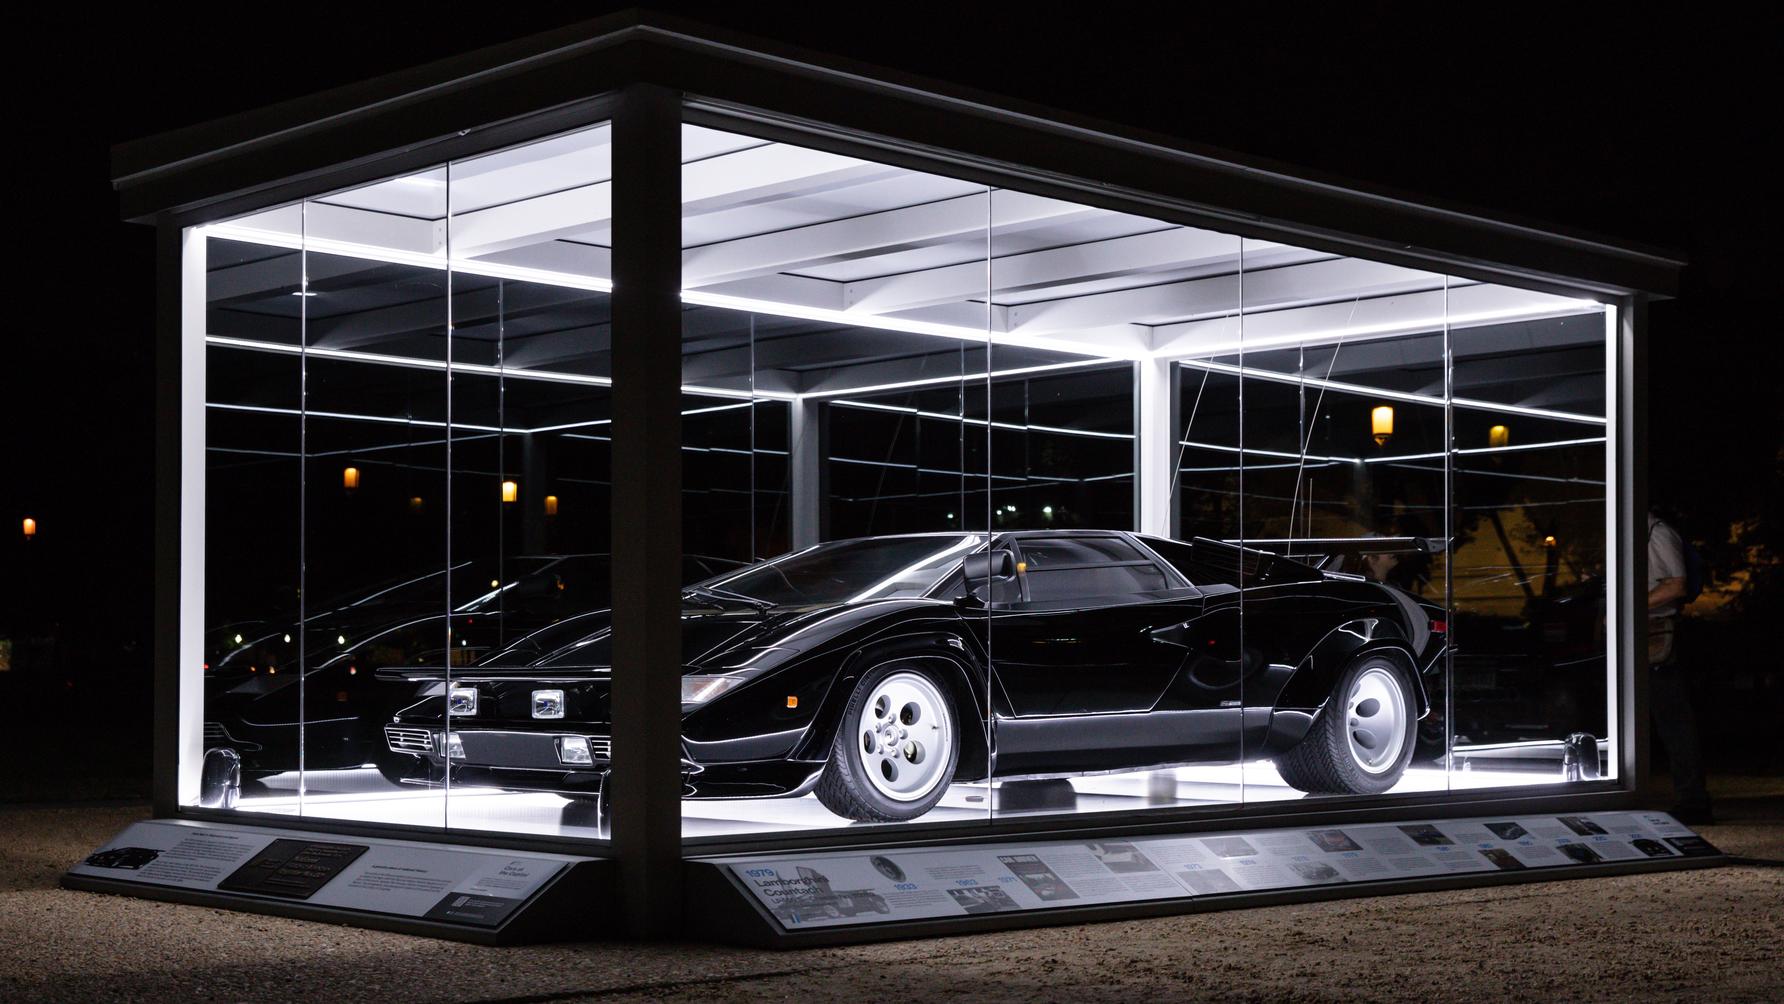  3D scan of the Lamborghini Countach LP400 S in the United States Library of Congress